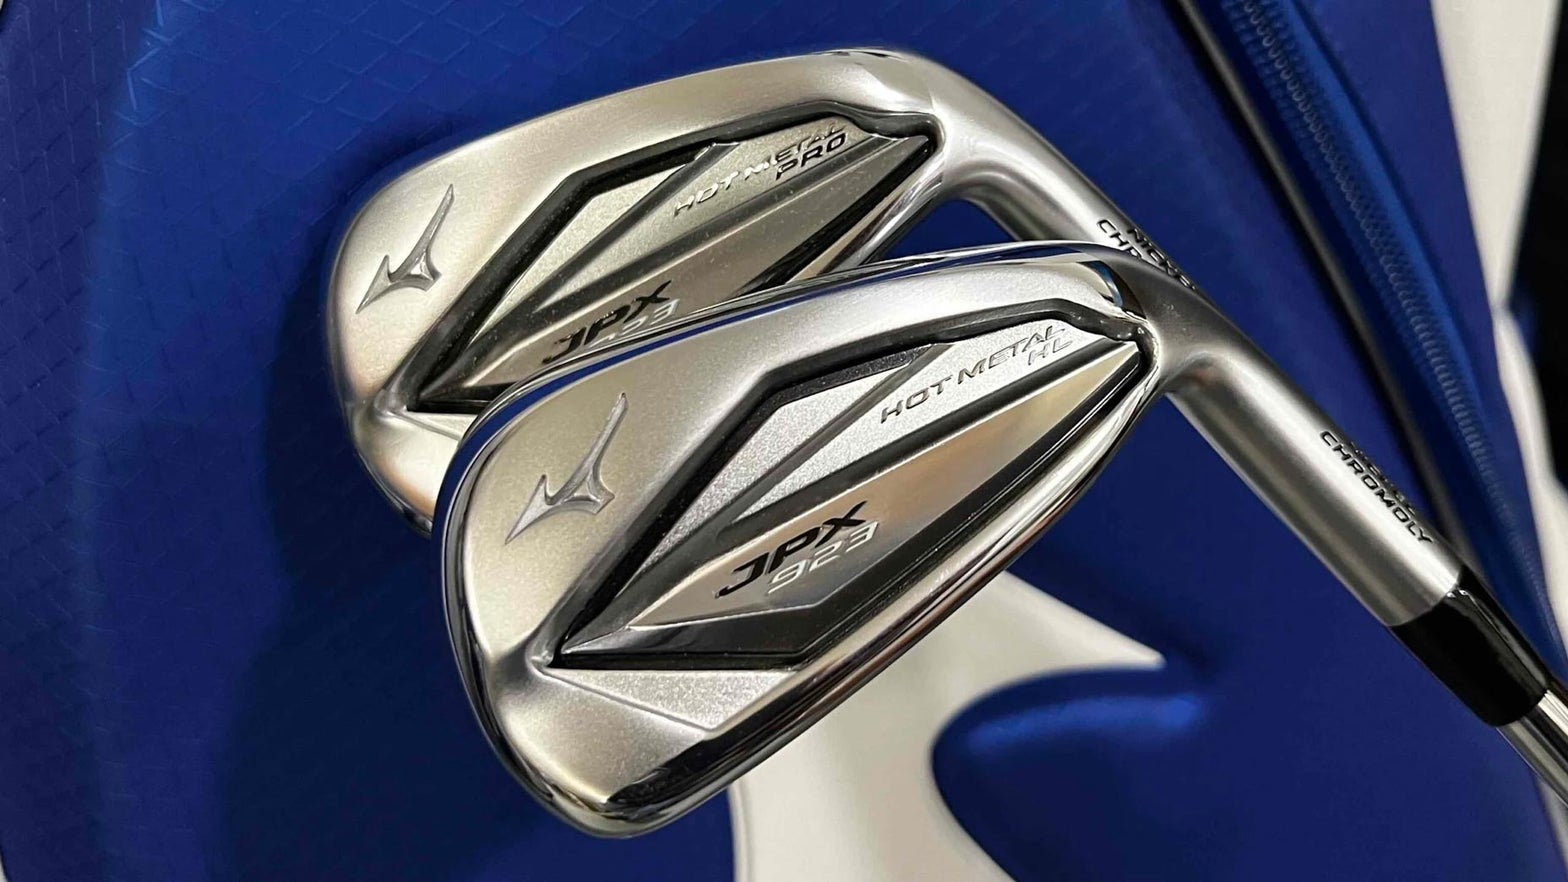 Mizuno JPX923 Hot Metal HL irons have serious stopping power